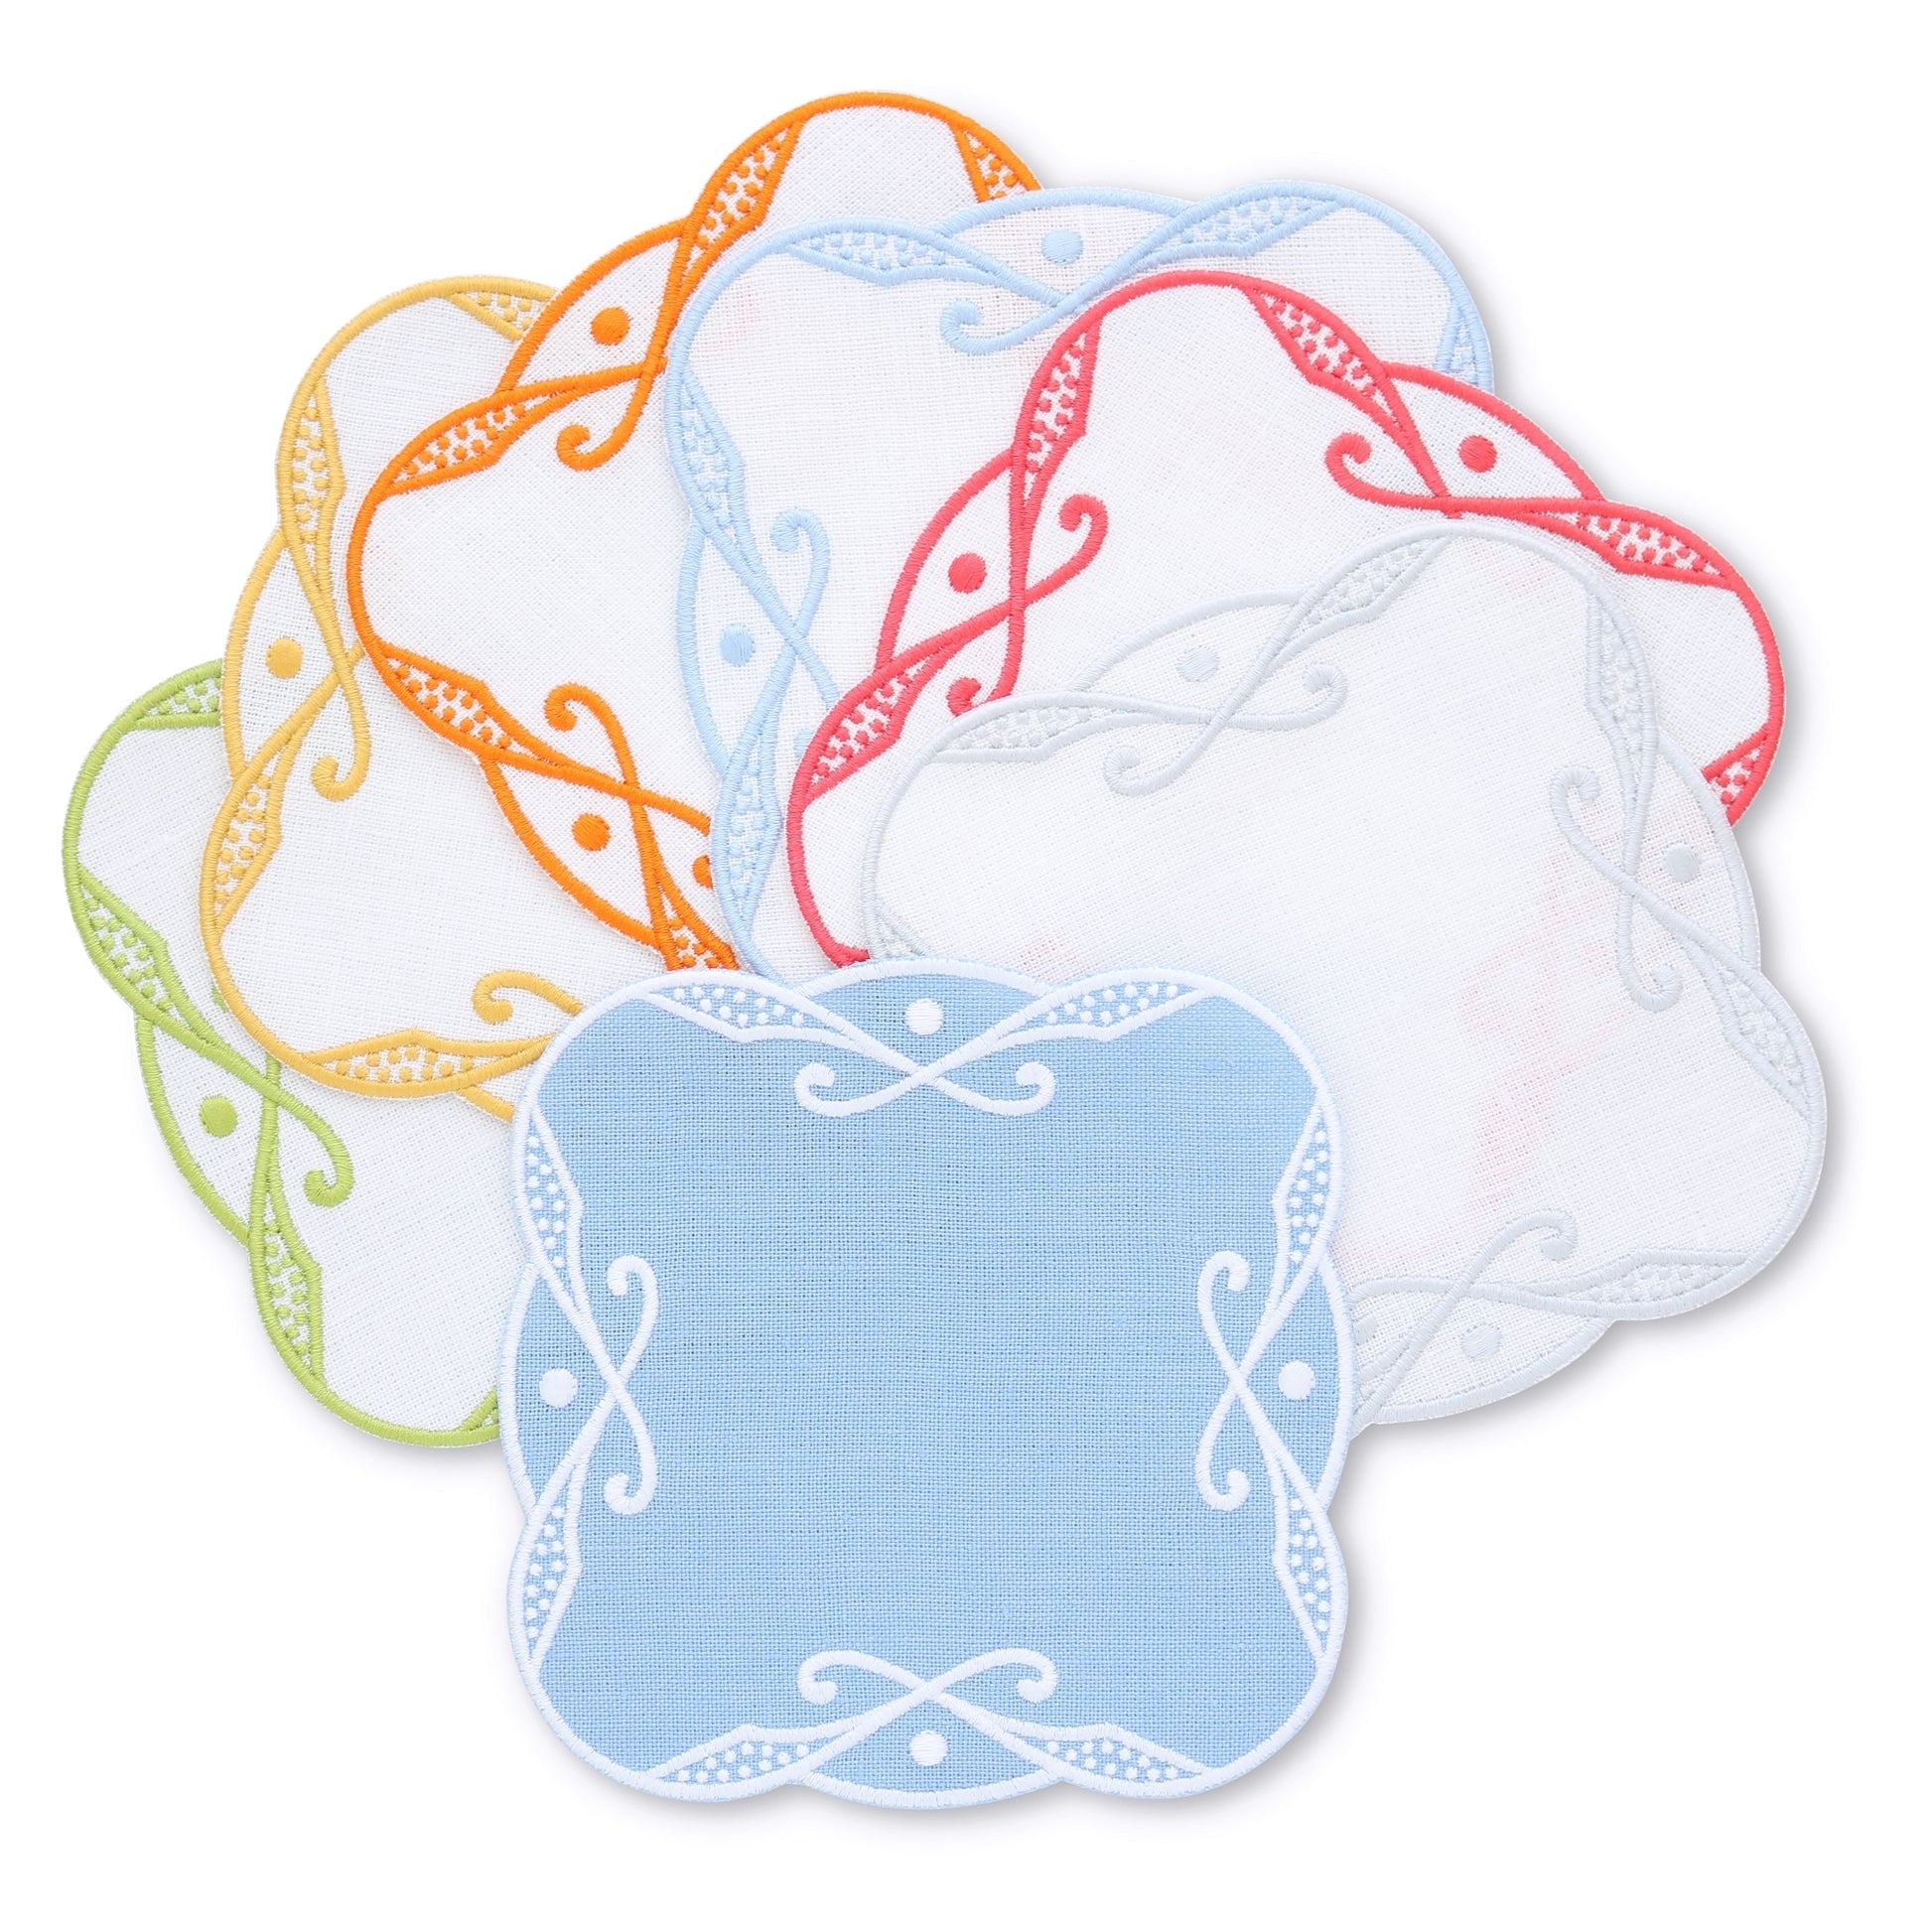 set of Charlotte embroidered cocktail napkins in various colors